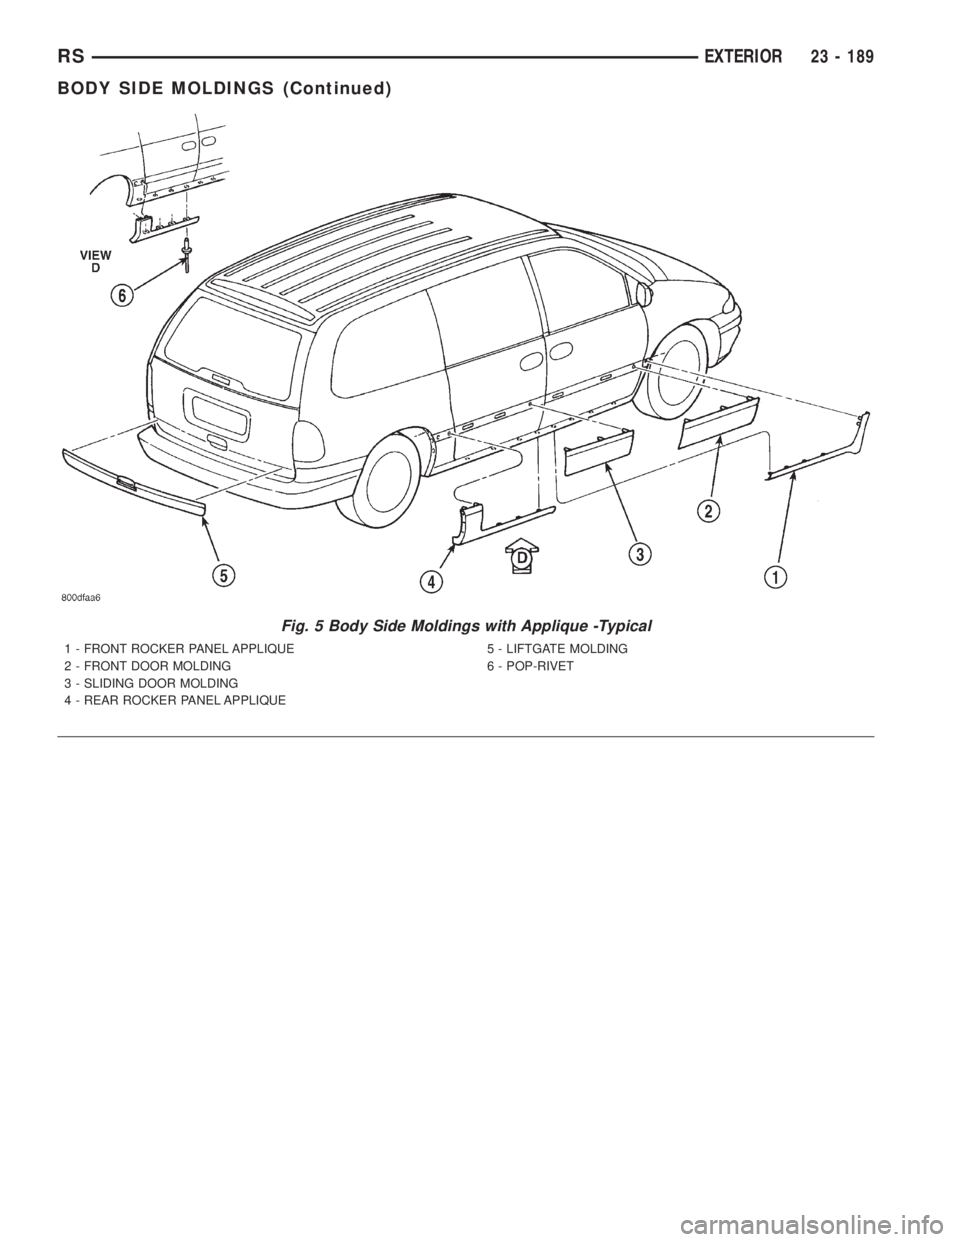 CHRYSLER VOYAGER 2001  Service Manual Fig. 5 Body Side Moldings with Applique -Typical
1 - FRONT ROCKER PANEL APPLIQUE
2 - FRONT DOOR MOLDING
3 - SLIDING DOOR MOLDING
4 - REAR ROCKER PANEL APPLIQUE5 - LIFTGATE MOLDING
6 - POP-RIVET
RSEXTE